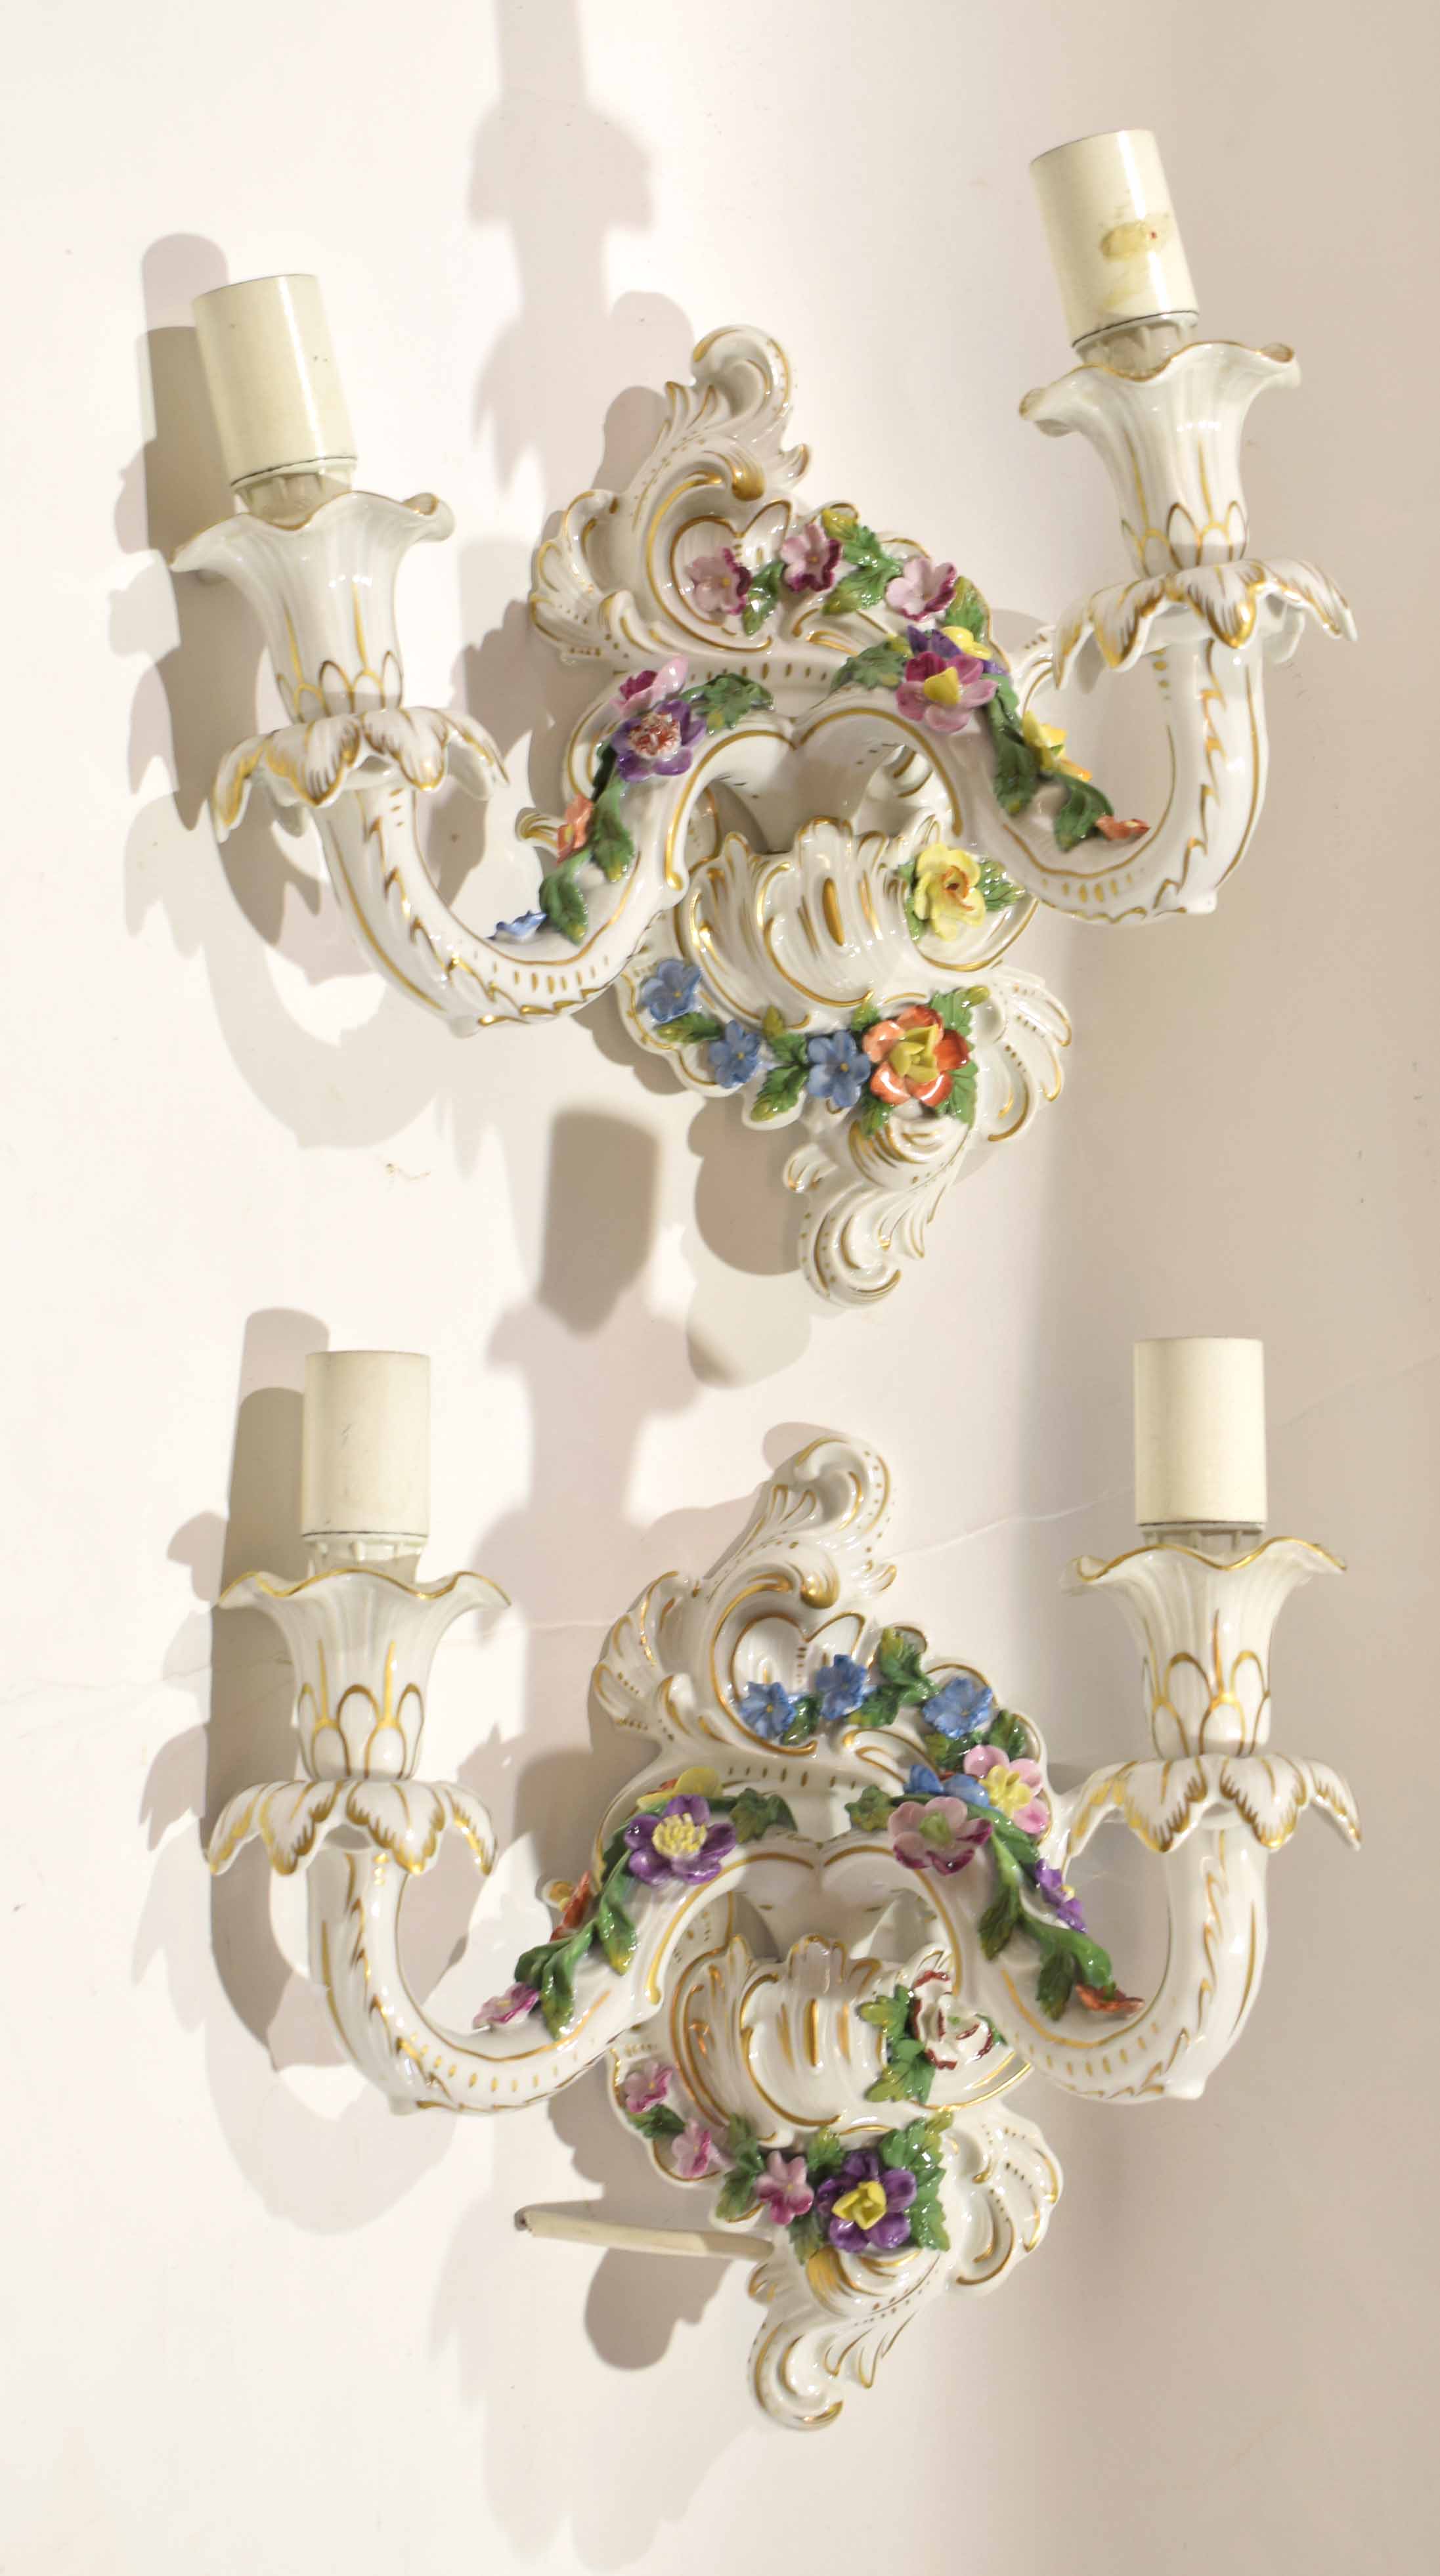 Pair of mid-20th century Continental porcelain wall lights with flower encrusted decoration and